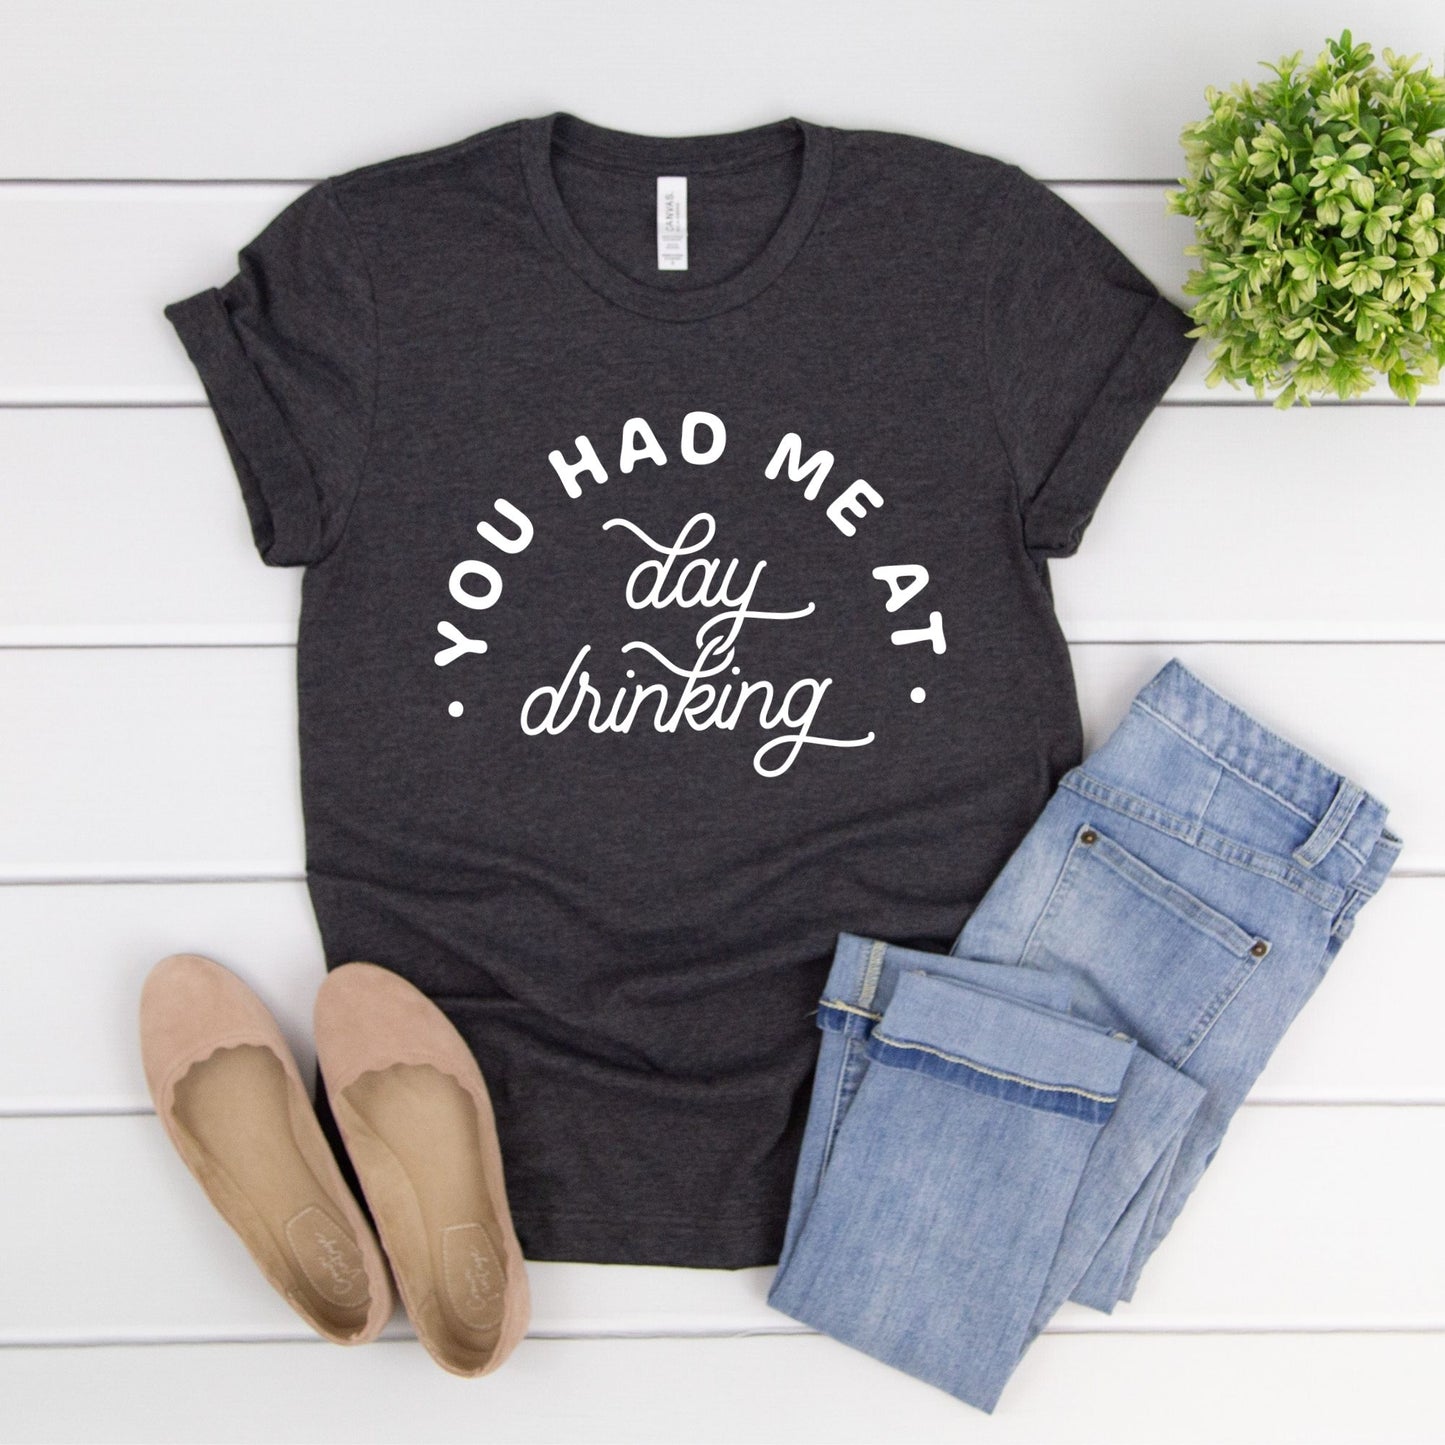 You Had Me At Day Drinking Premium Graphic T-Shirt